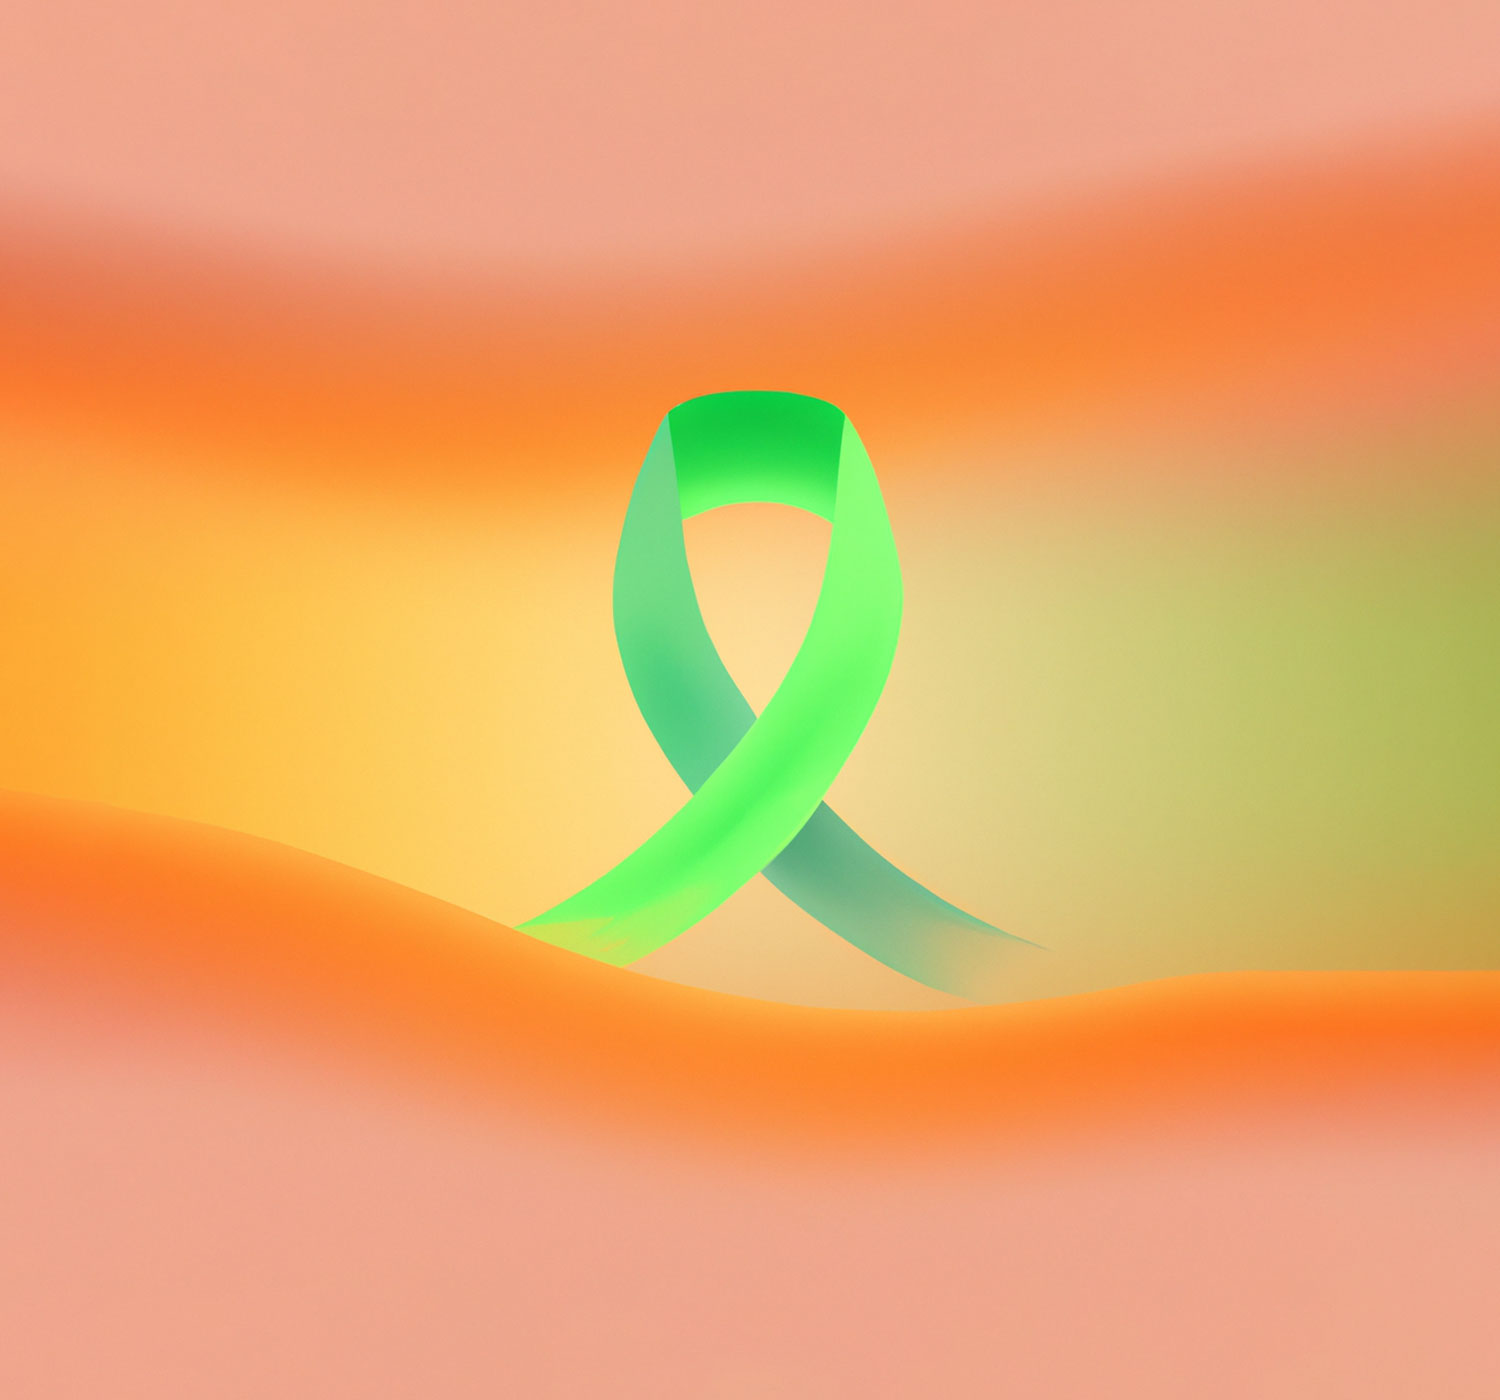 Green awareness ribbon on a colorful background